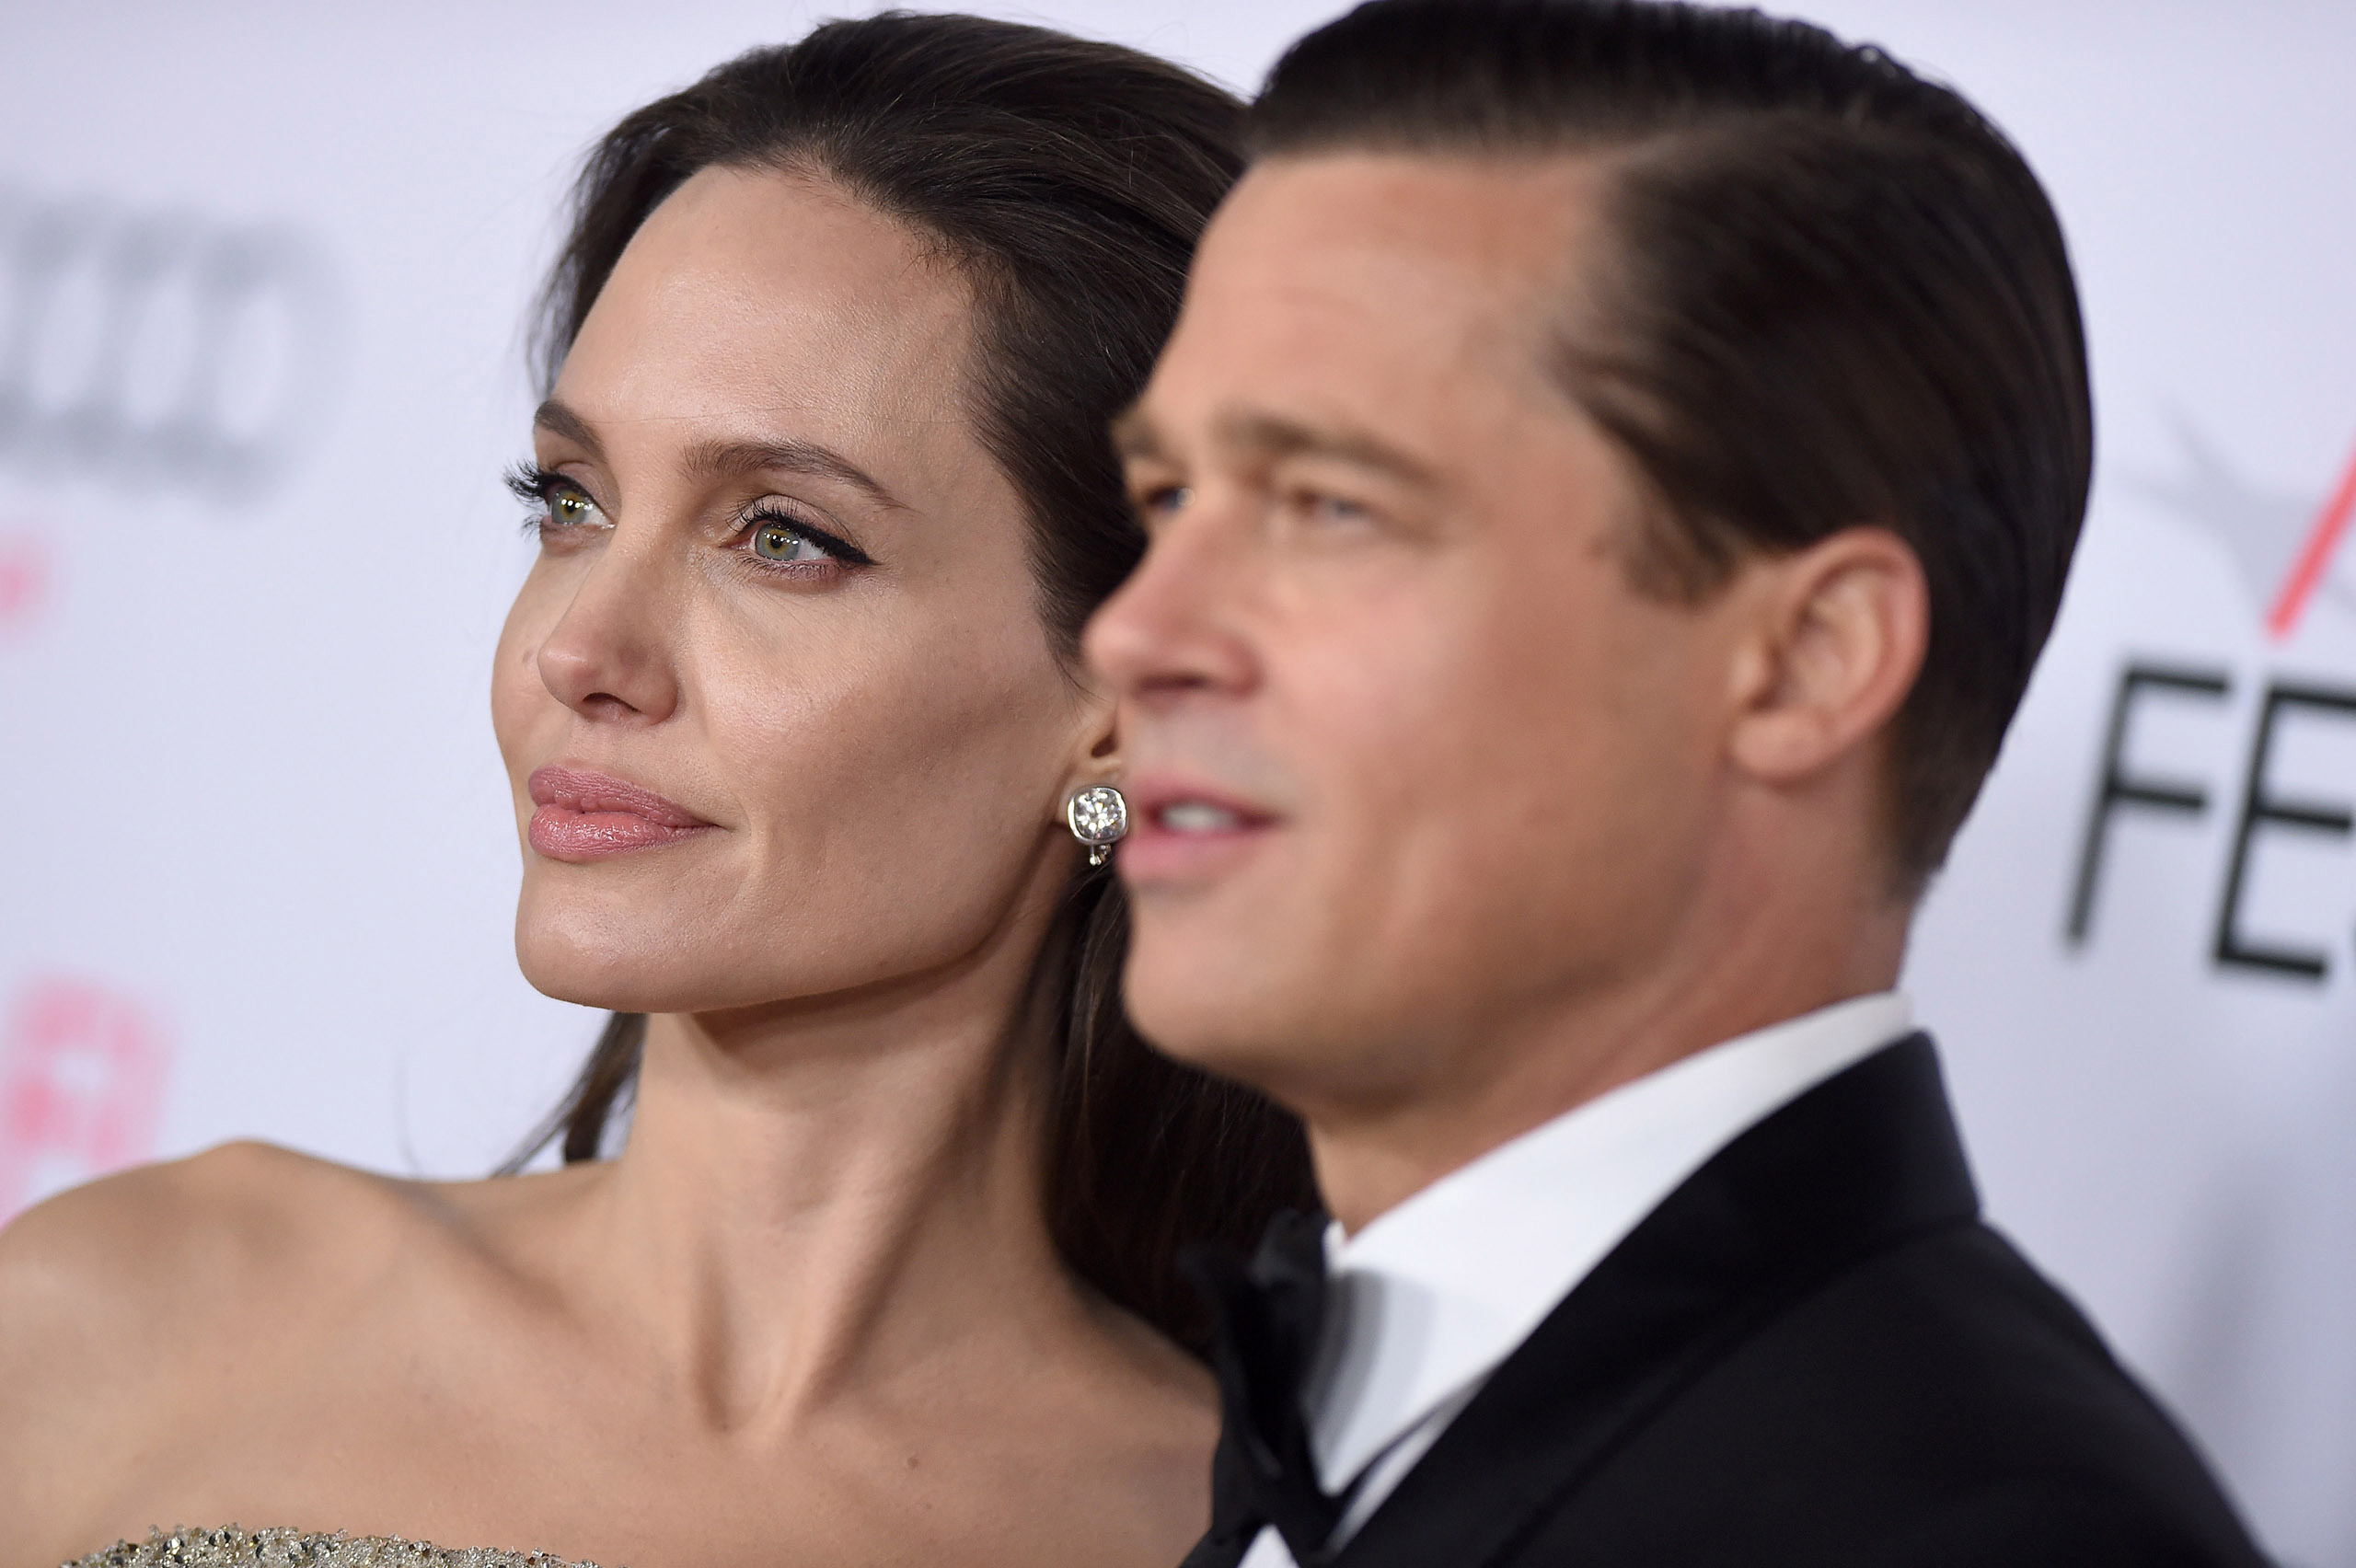 Angelina Jolie and Brad Pitt arrive at the AFI FEST 2015 Opening Night Gala Premiere of Universal Pictures' 'By The Sea' in Hollywood, Calif. on Nov. 5, 2015. (Axelle/Bauer-Griffin/FilmMagic/Getty Images)